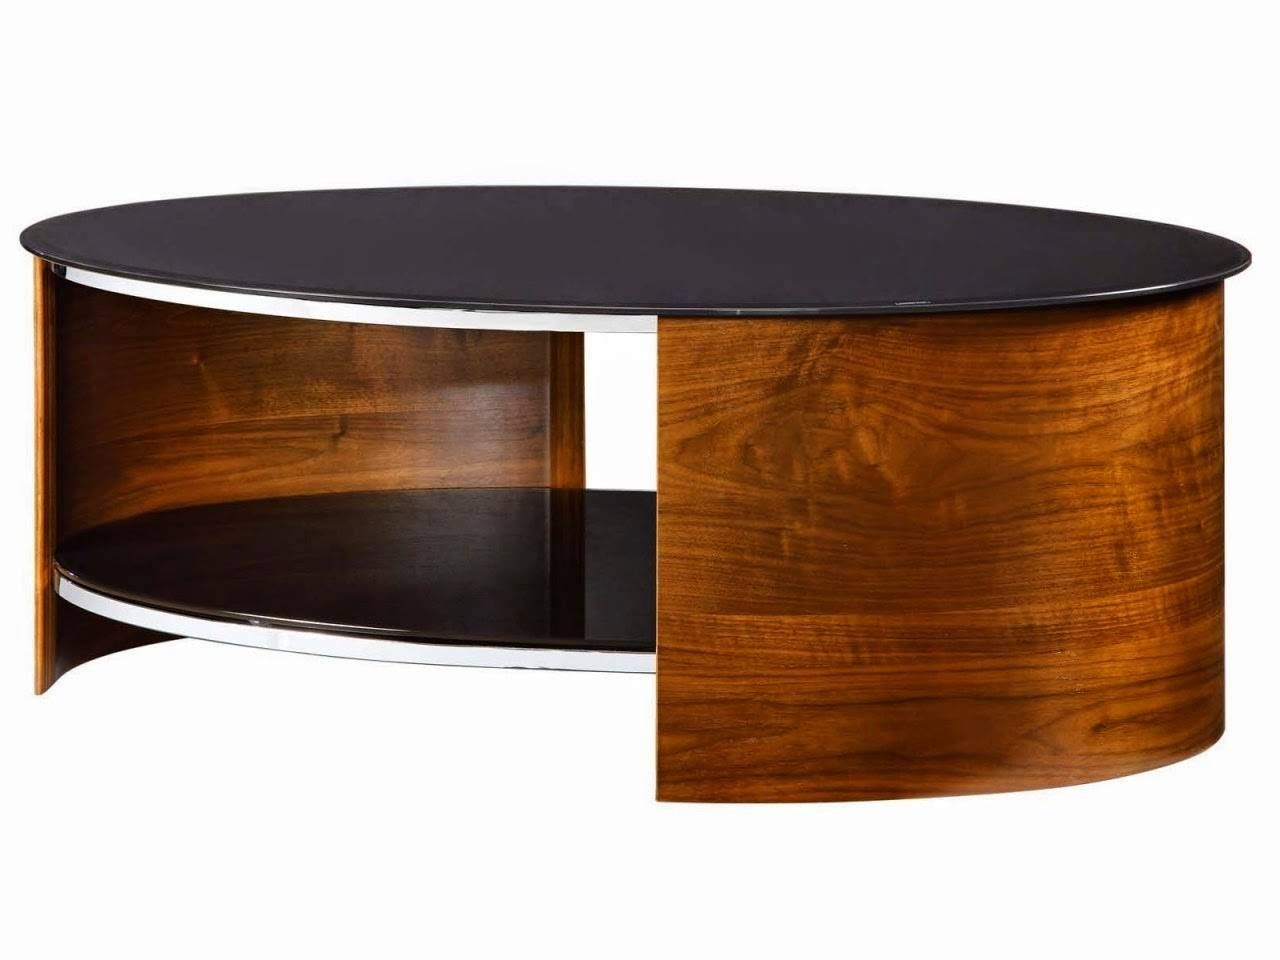 Wood Coffee Tables Uk For Sale – Coffee Table With Storage, Glass Within Oval Black Glass Coffee Tables (View 9 of 30)